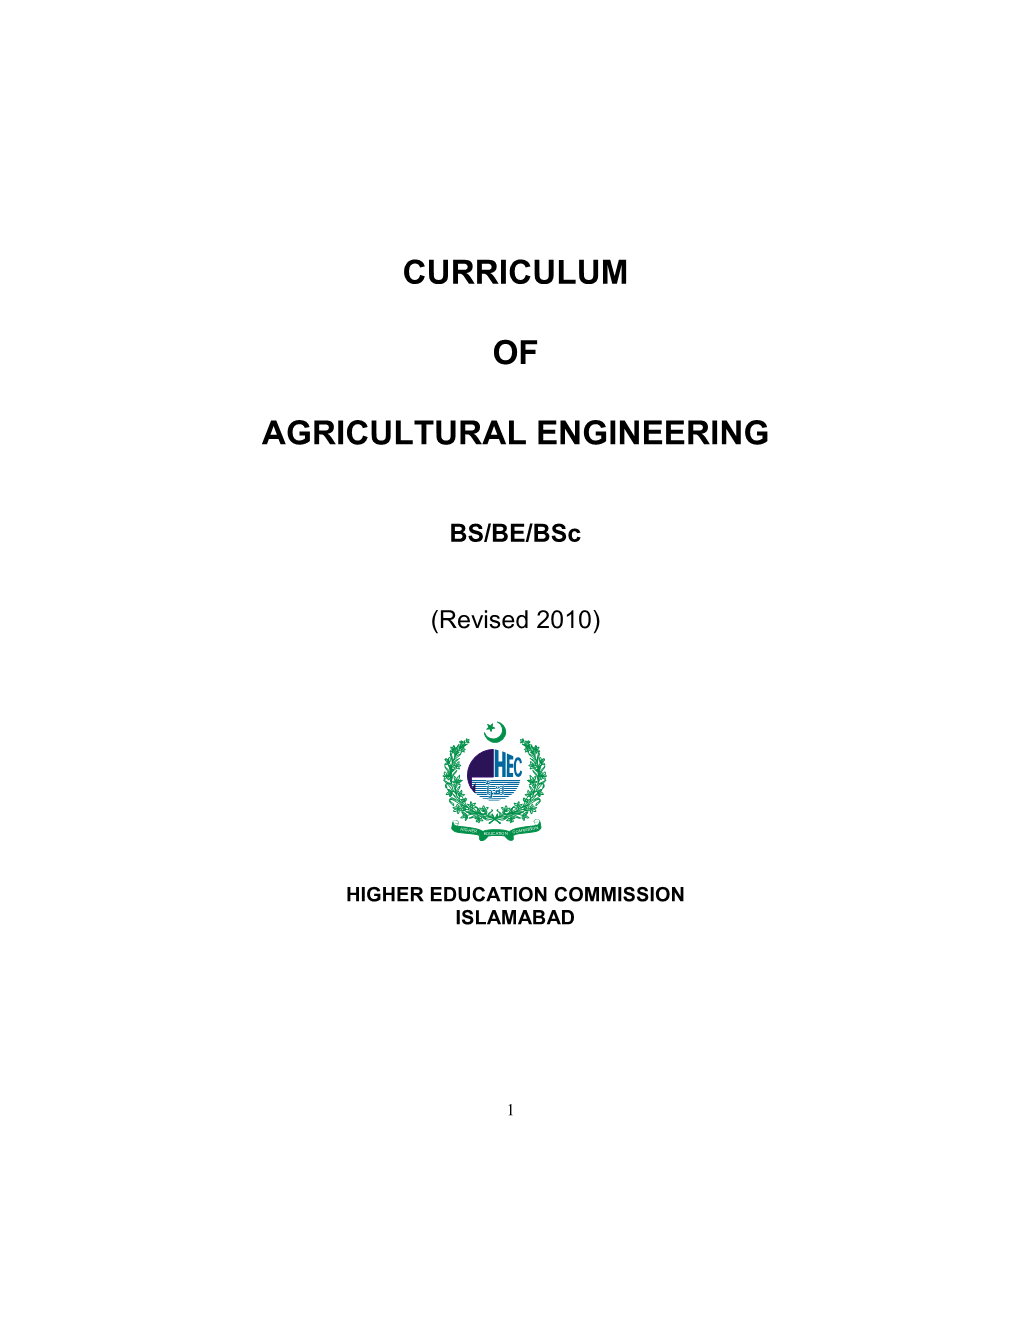 Curriculum of Agricultural Engineering Developed in the Preliminary Held on December 7-9, 2009 at HEC Regional Lahore